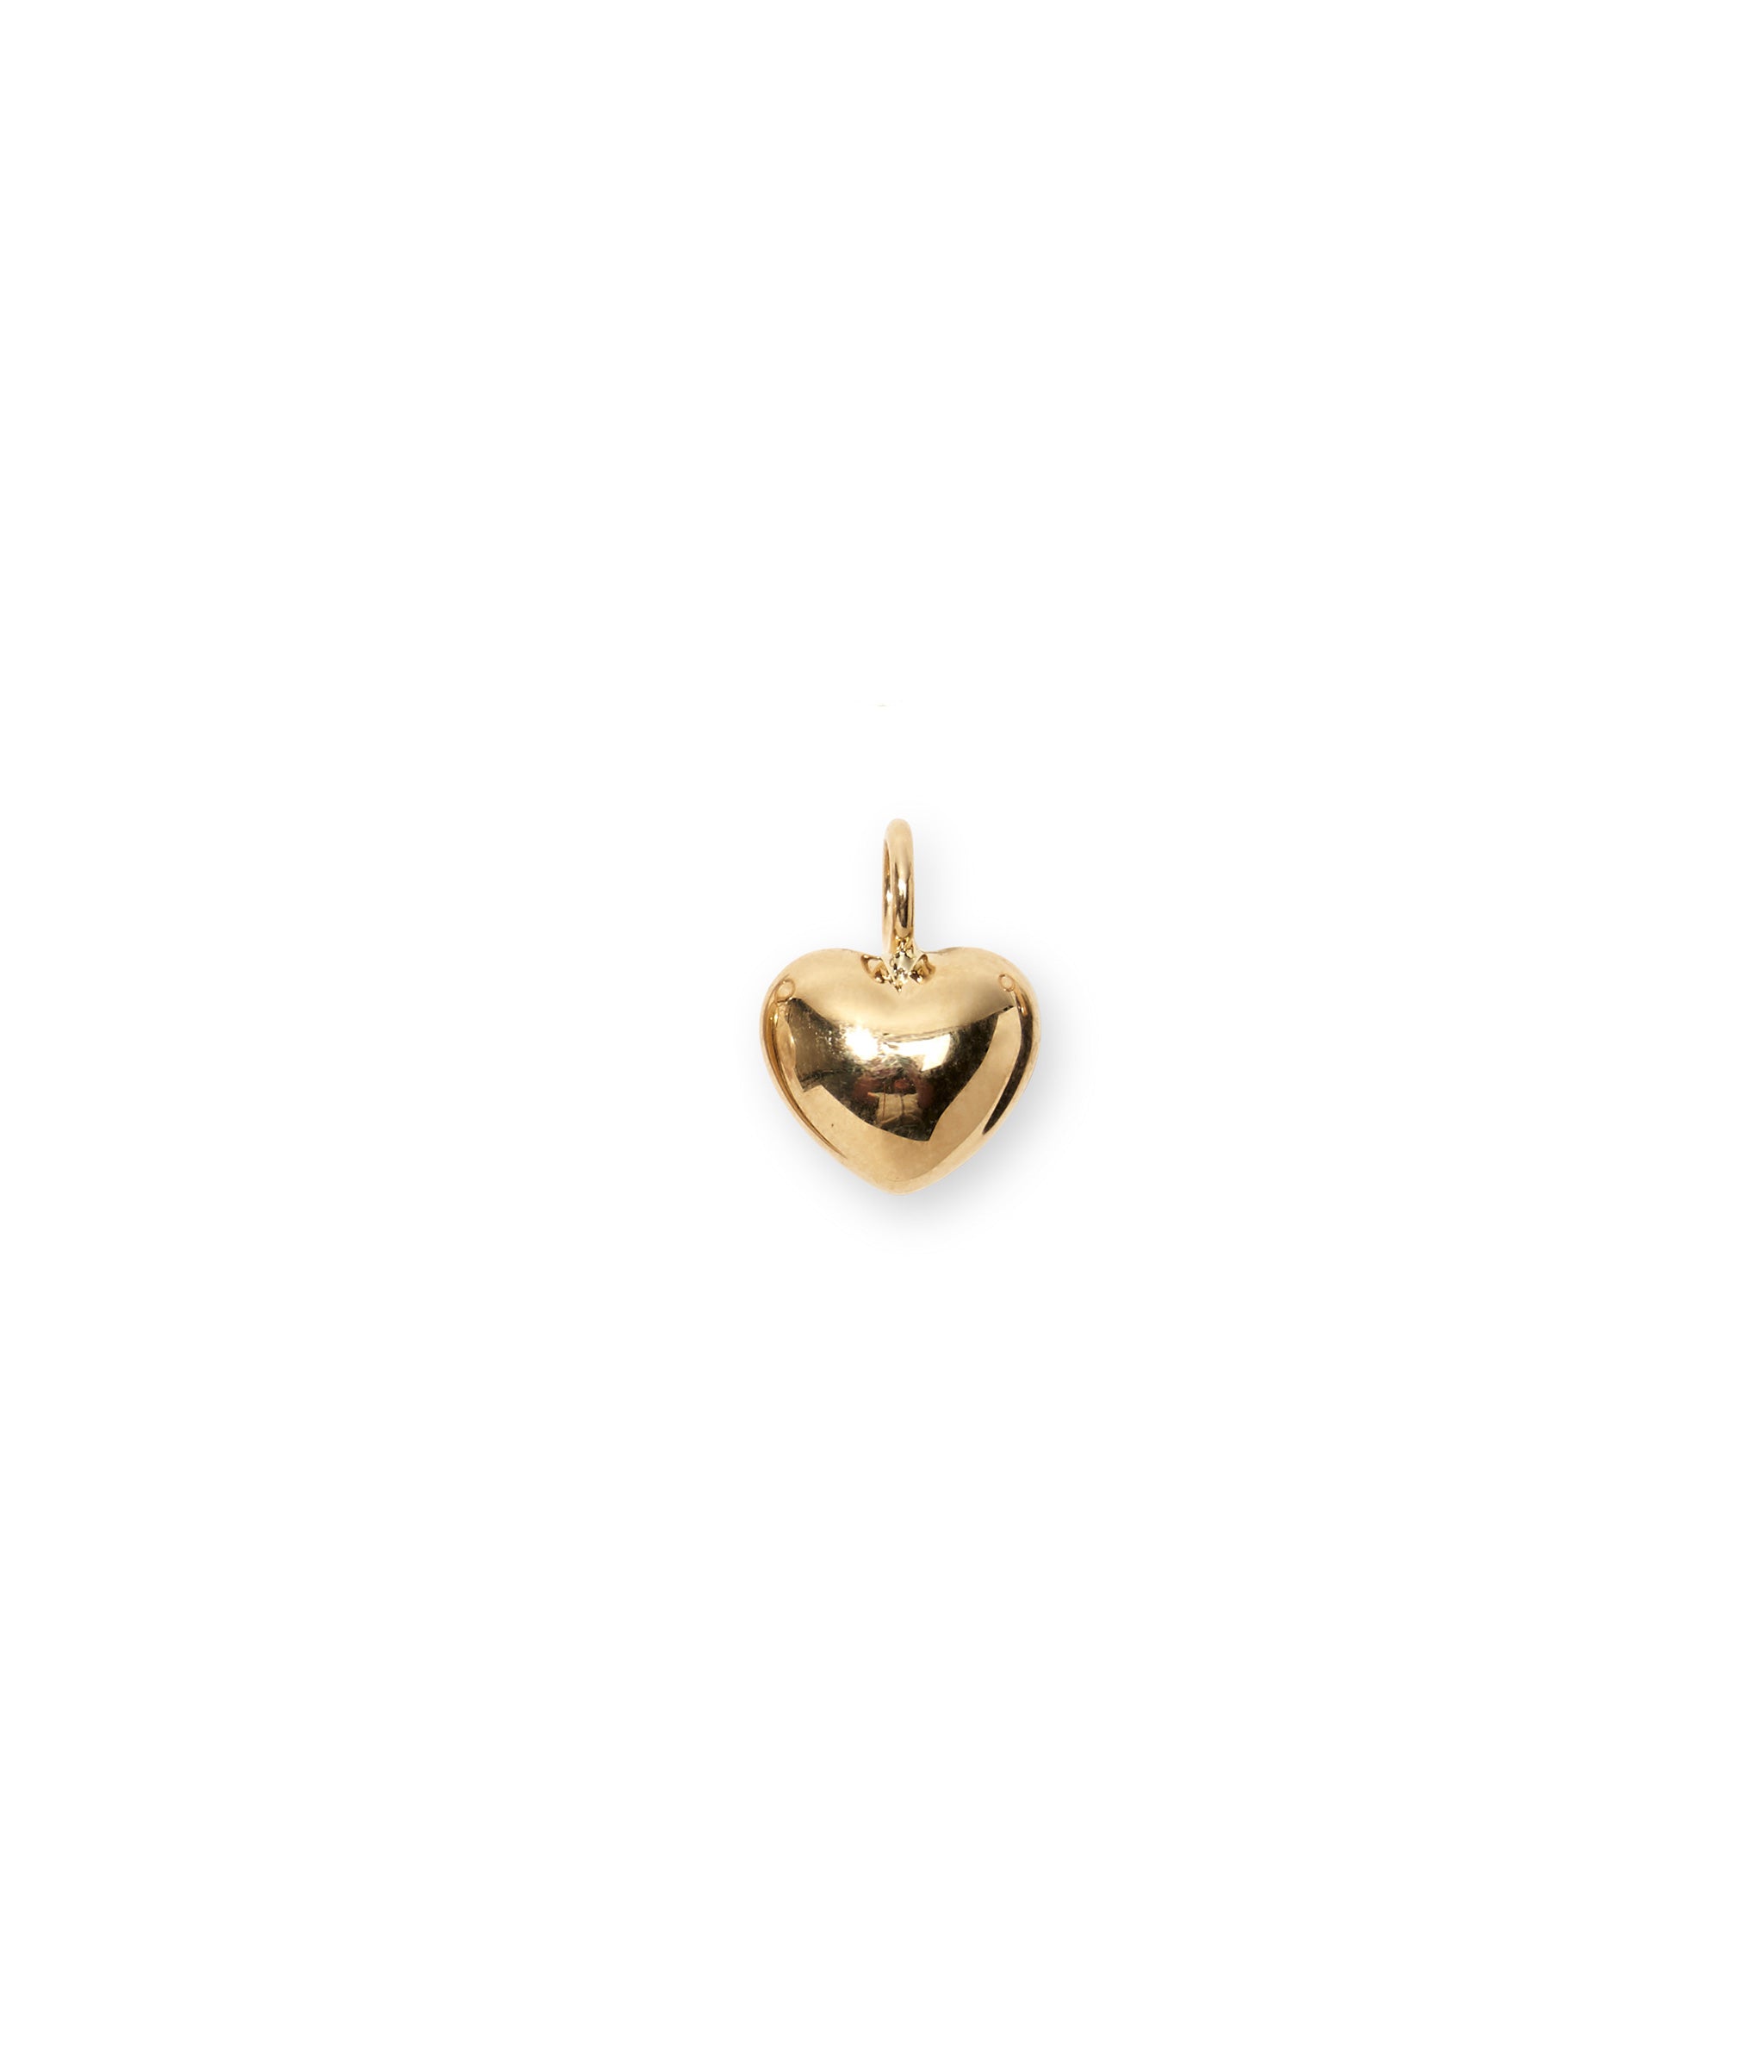 14K Gold Heart Necklace Charm. Hollow puffy gold heart.